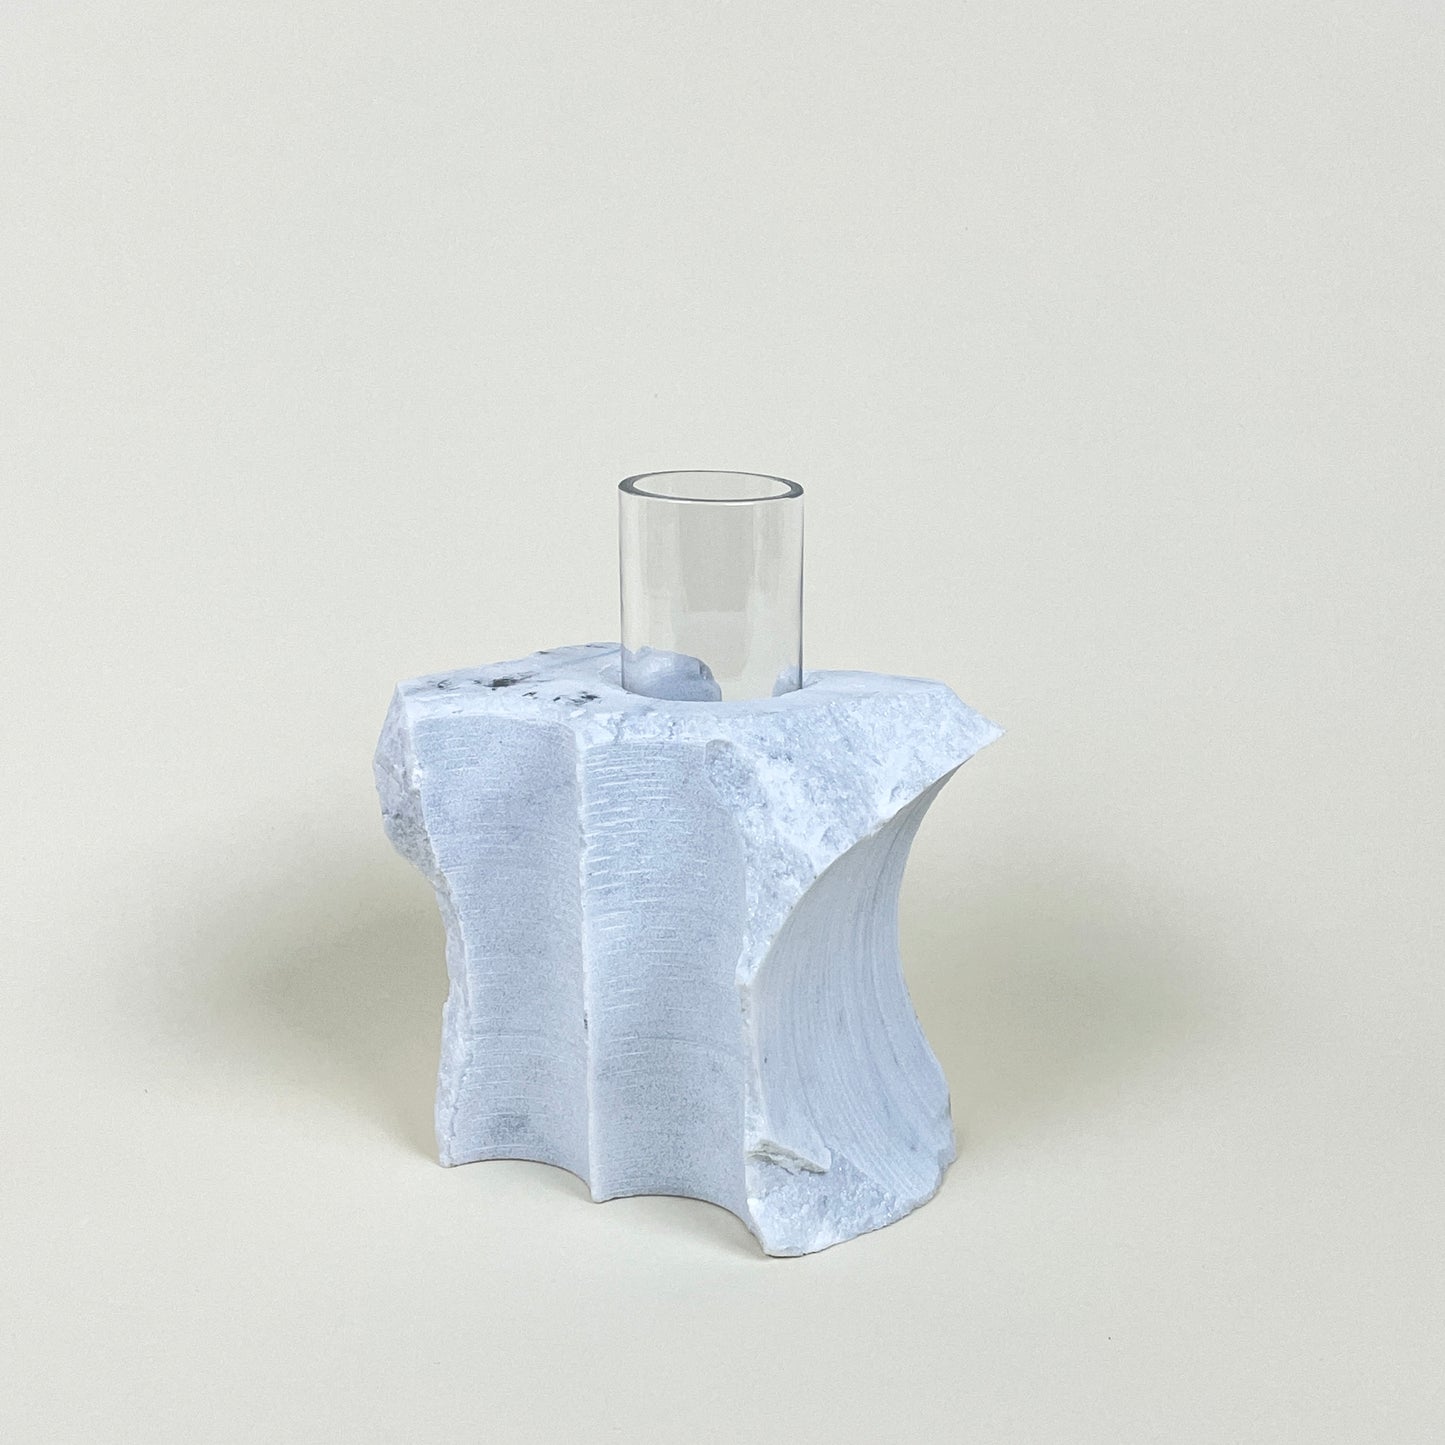 Marble and glass vase by Erik Olovsson